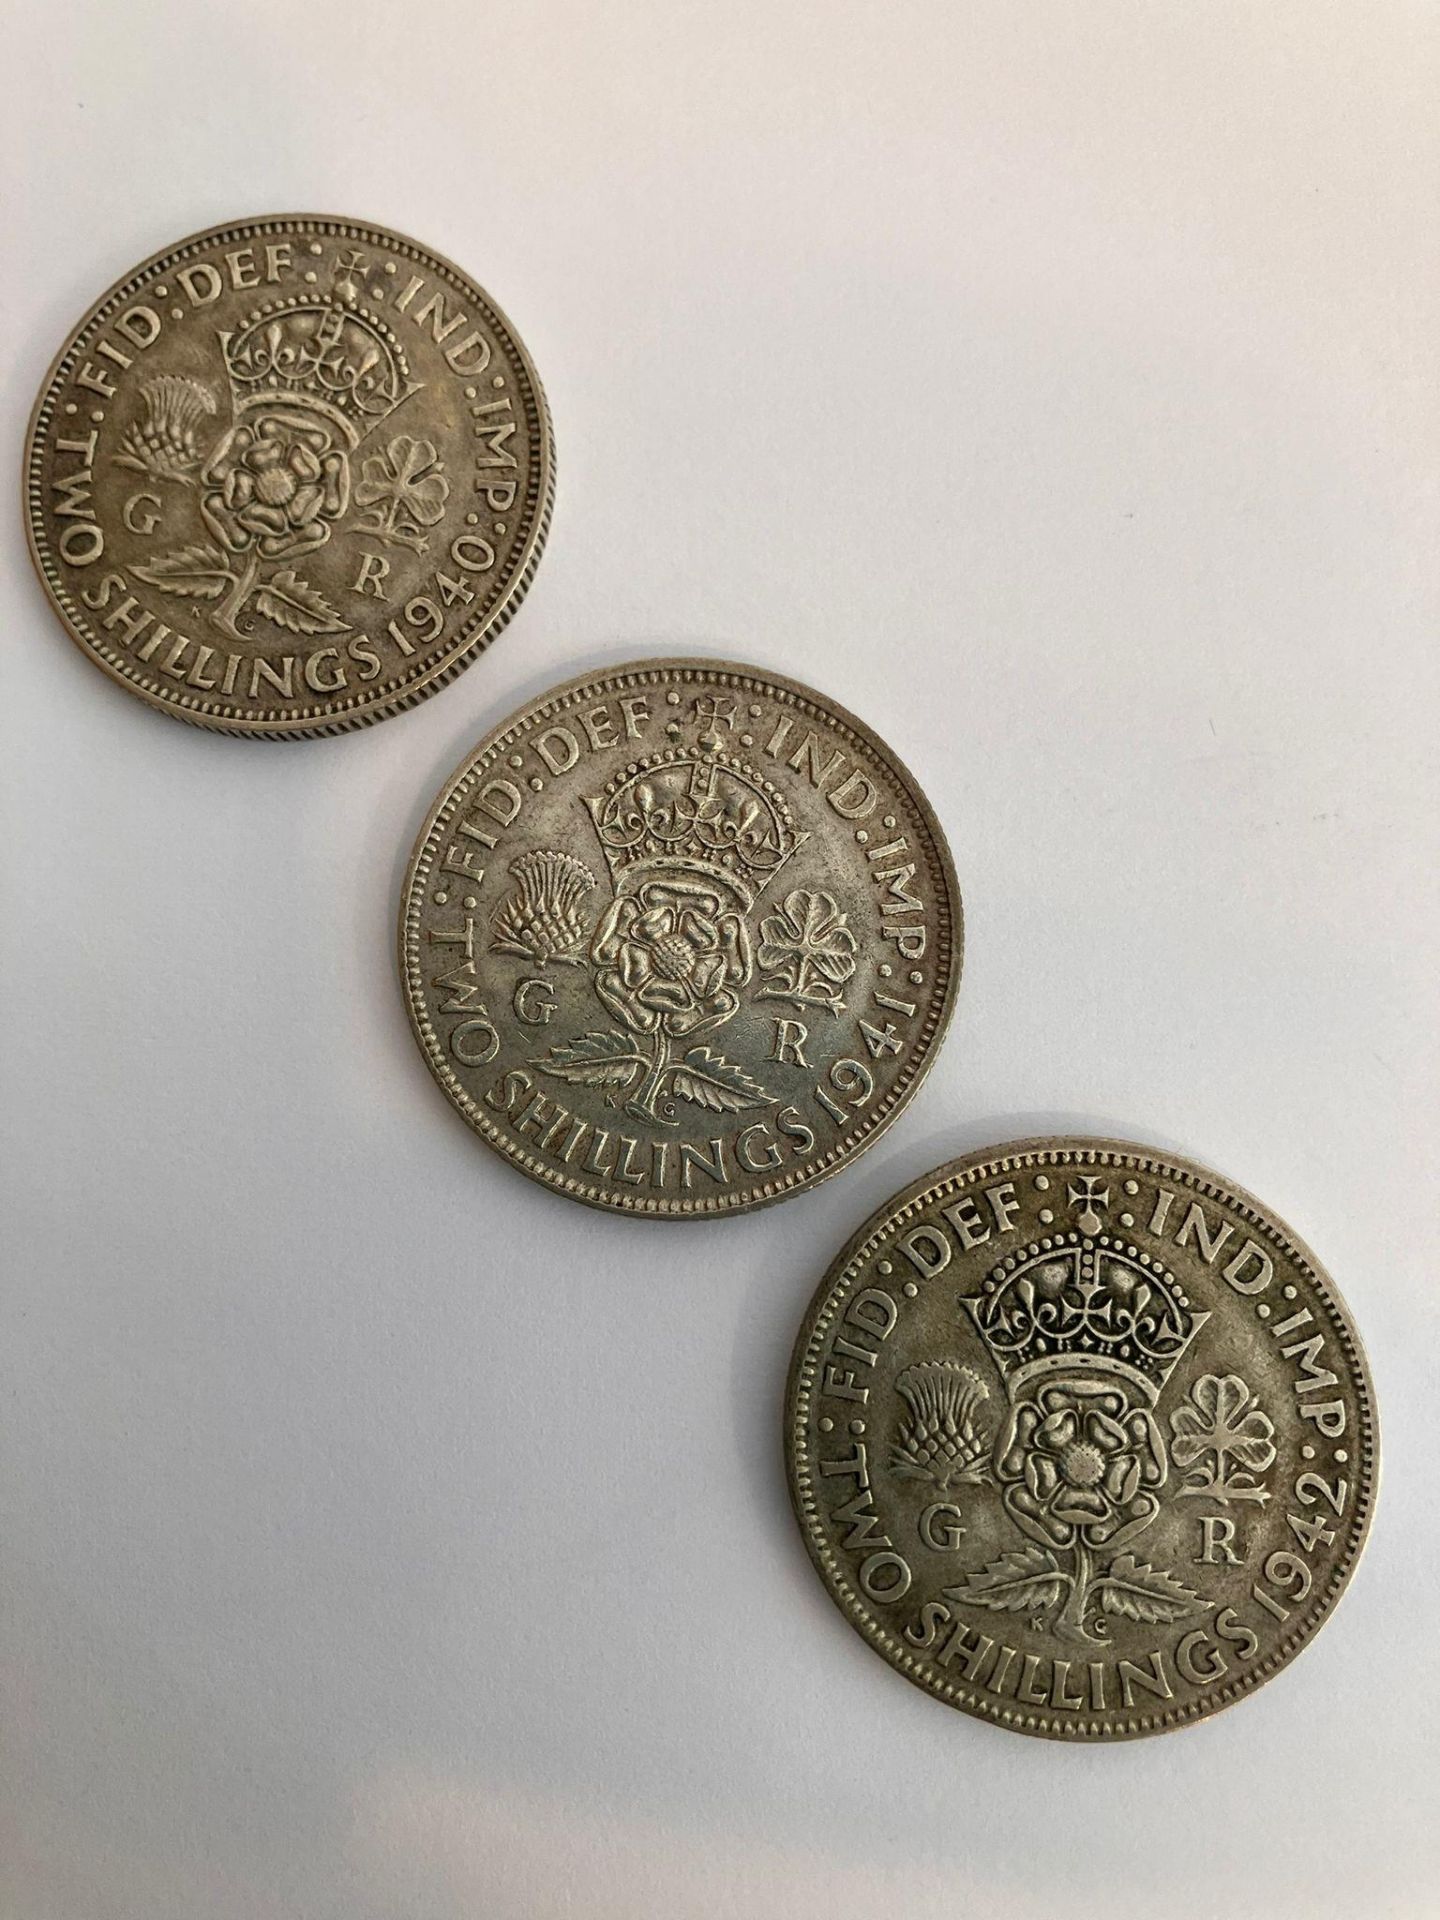 3 x WWII SILVER FLORINS. Consecutive years 1941,1942,1943, all in very fine/extra fine condition. - Image 2 of 2